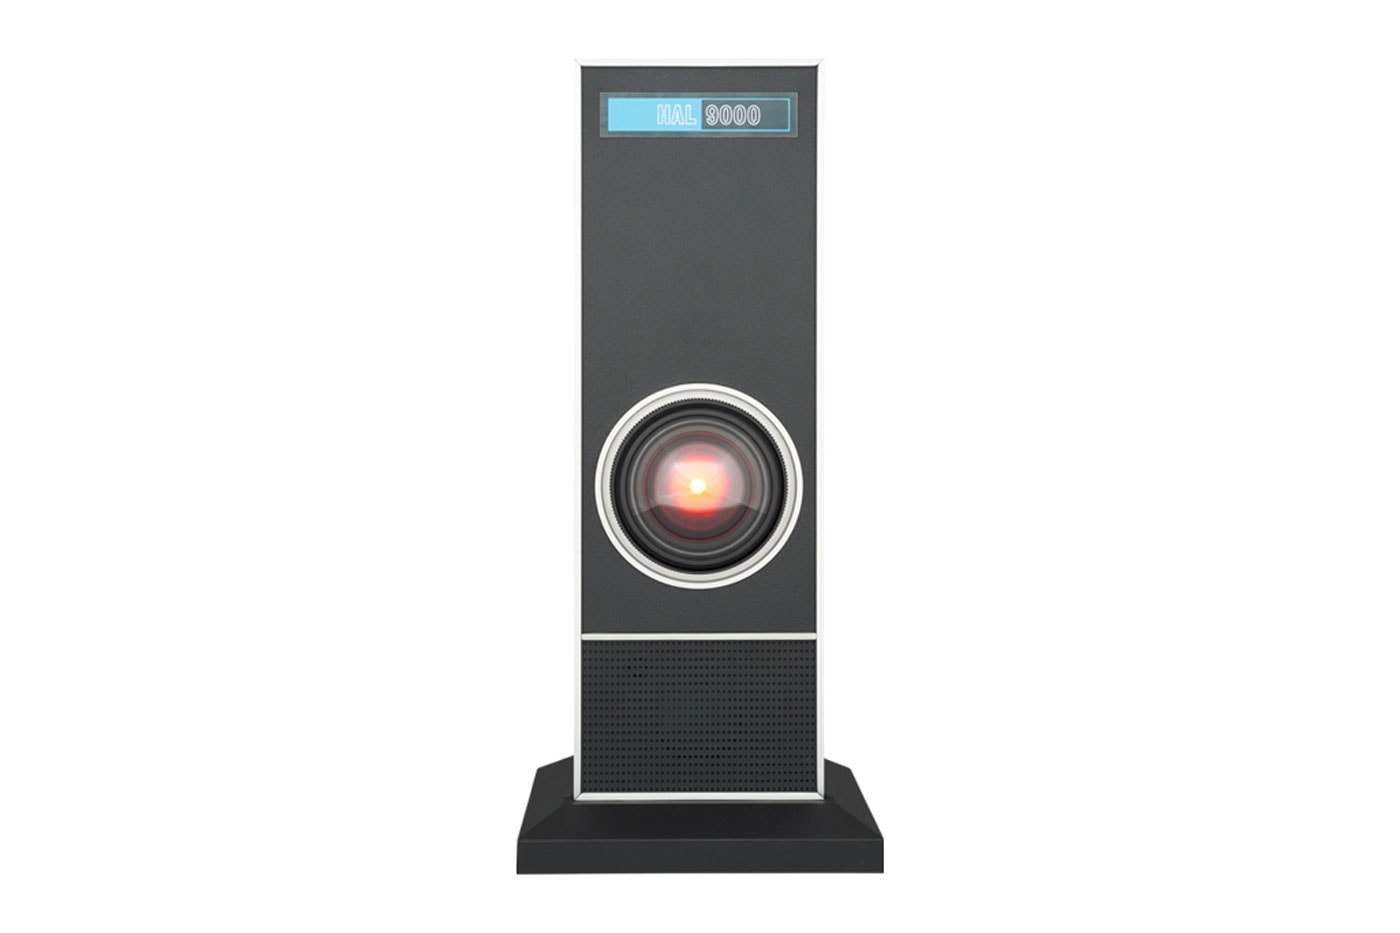 Medicom Toy Recreates the HAL 9000 Computer From 2001: A Space Odyssey 